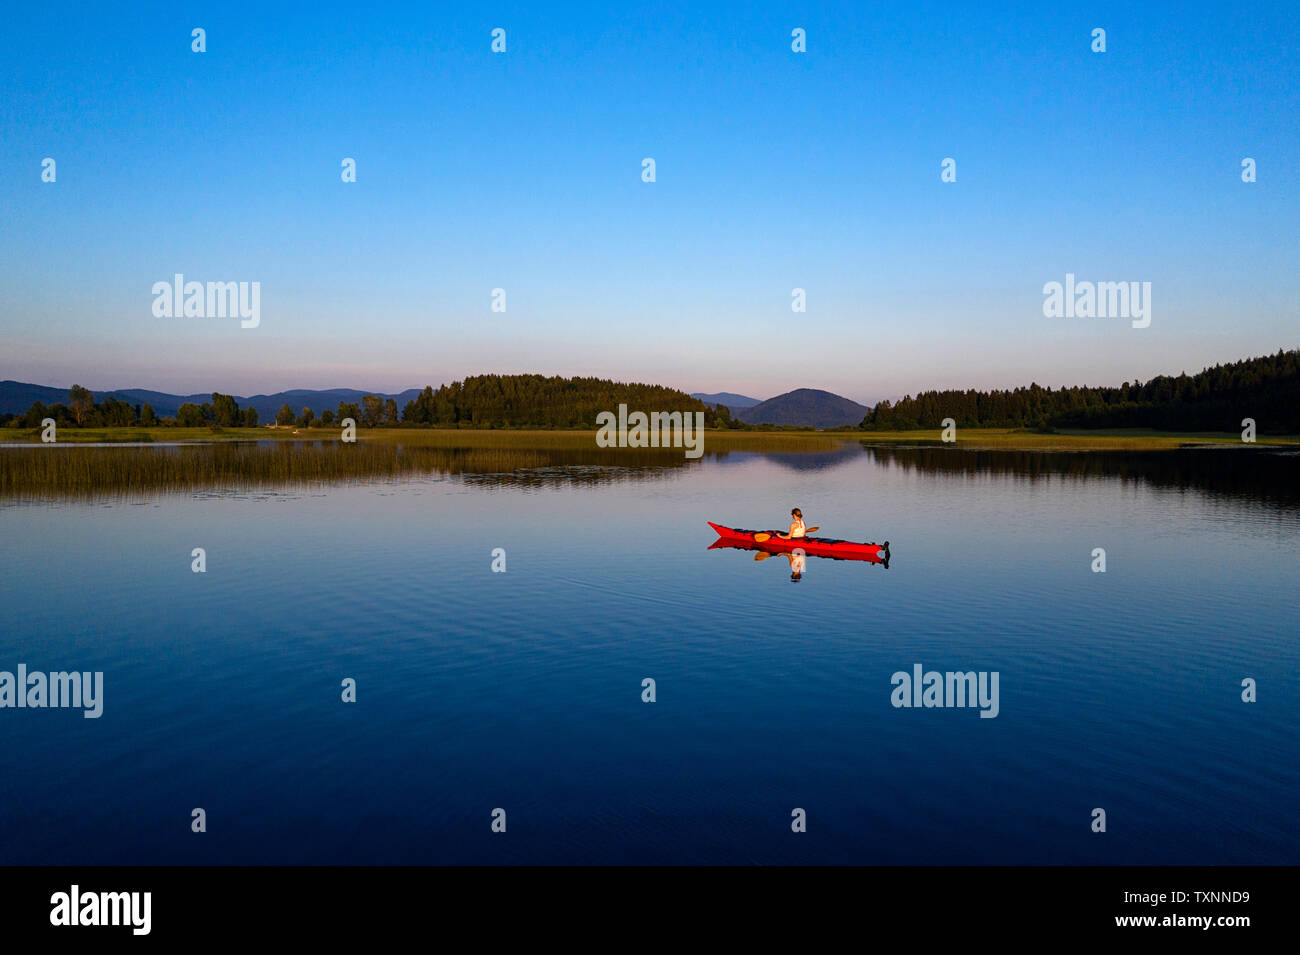 Aerial rear view of athletic woman kayaking at sunset on lake Cerknica, Slovenia, taken by drone. Stock Photo